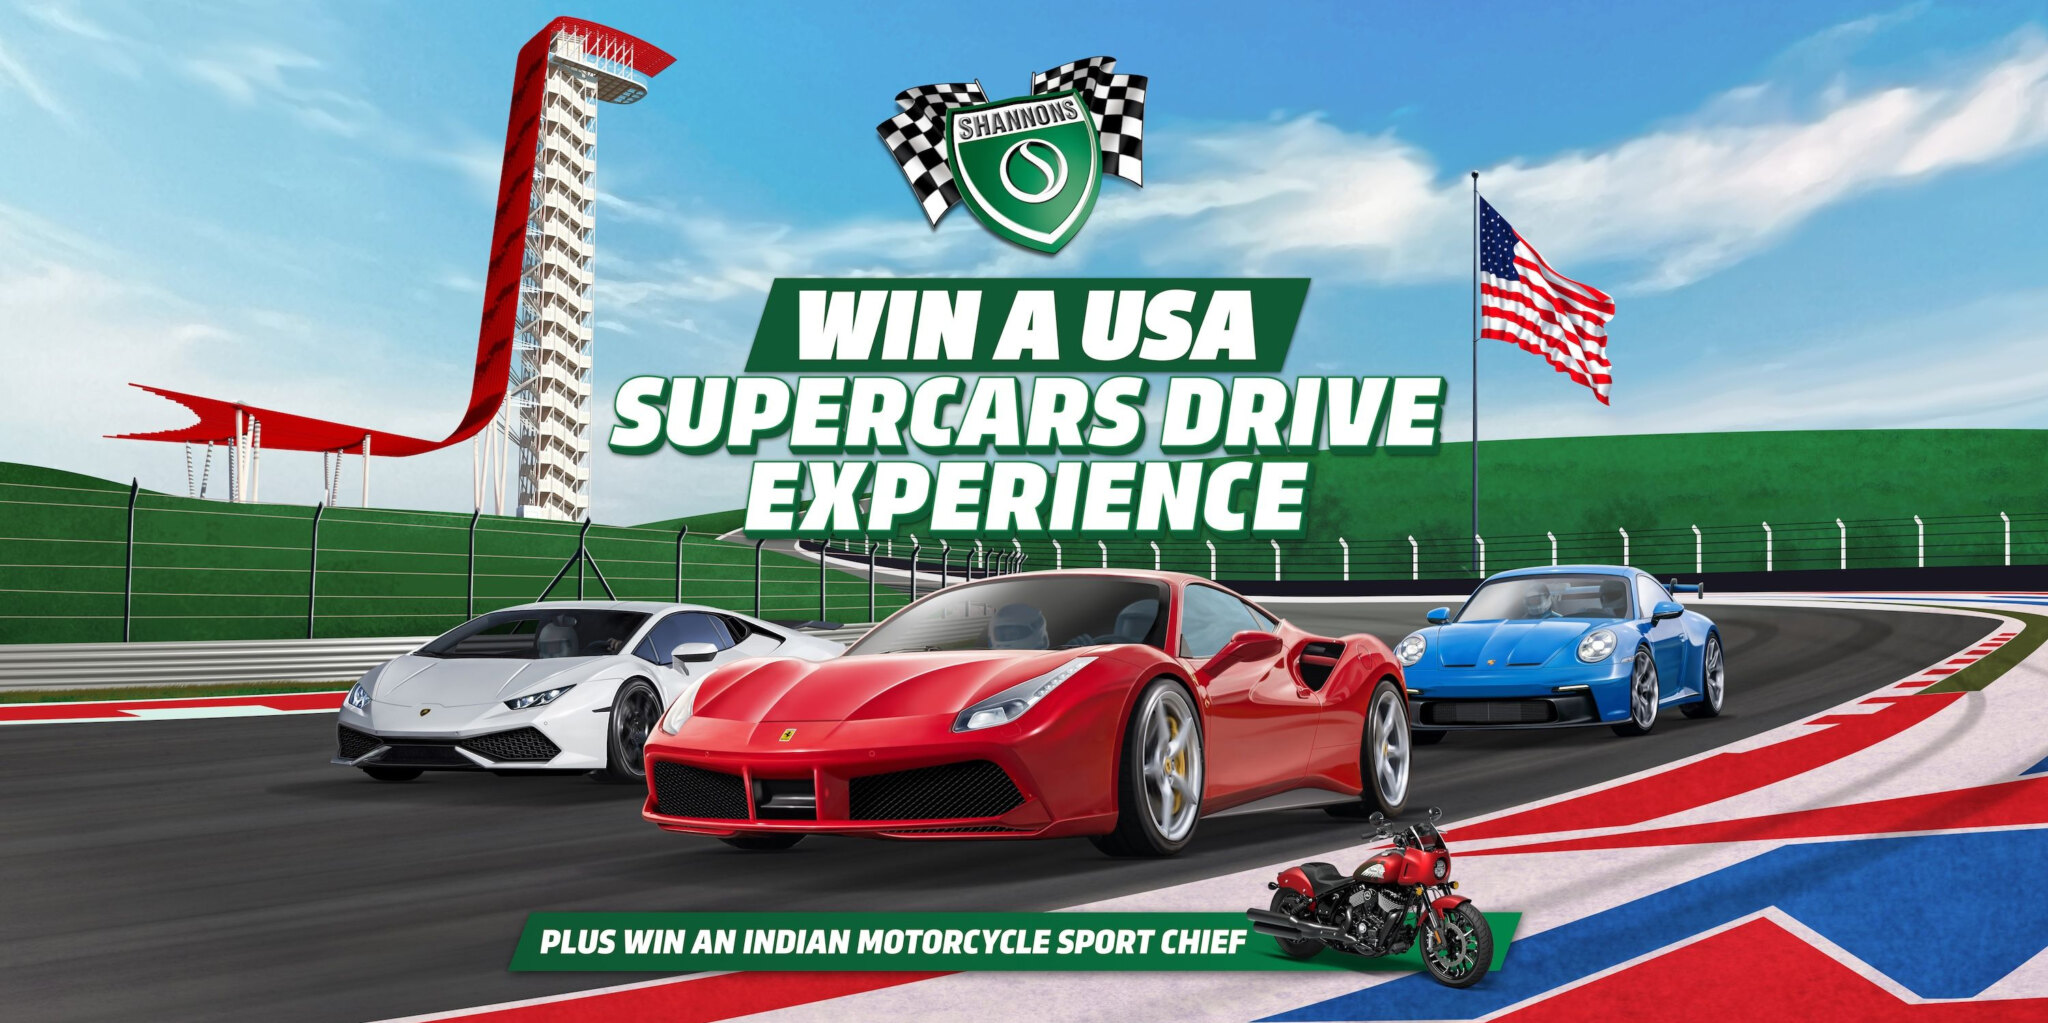 Shannons USA Supercars & Indian Motorcycle Competition